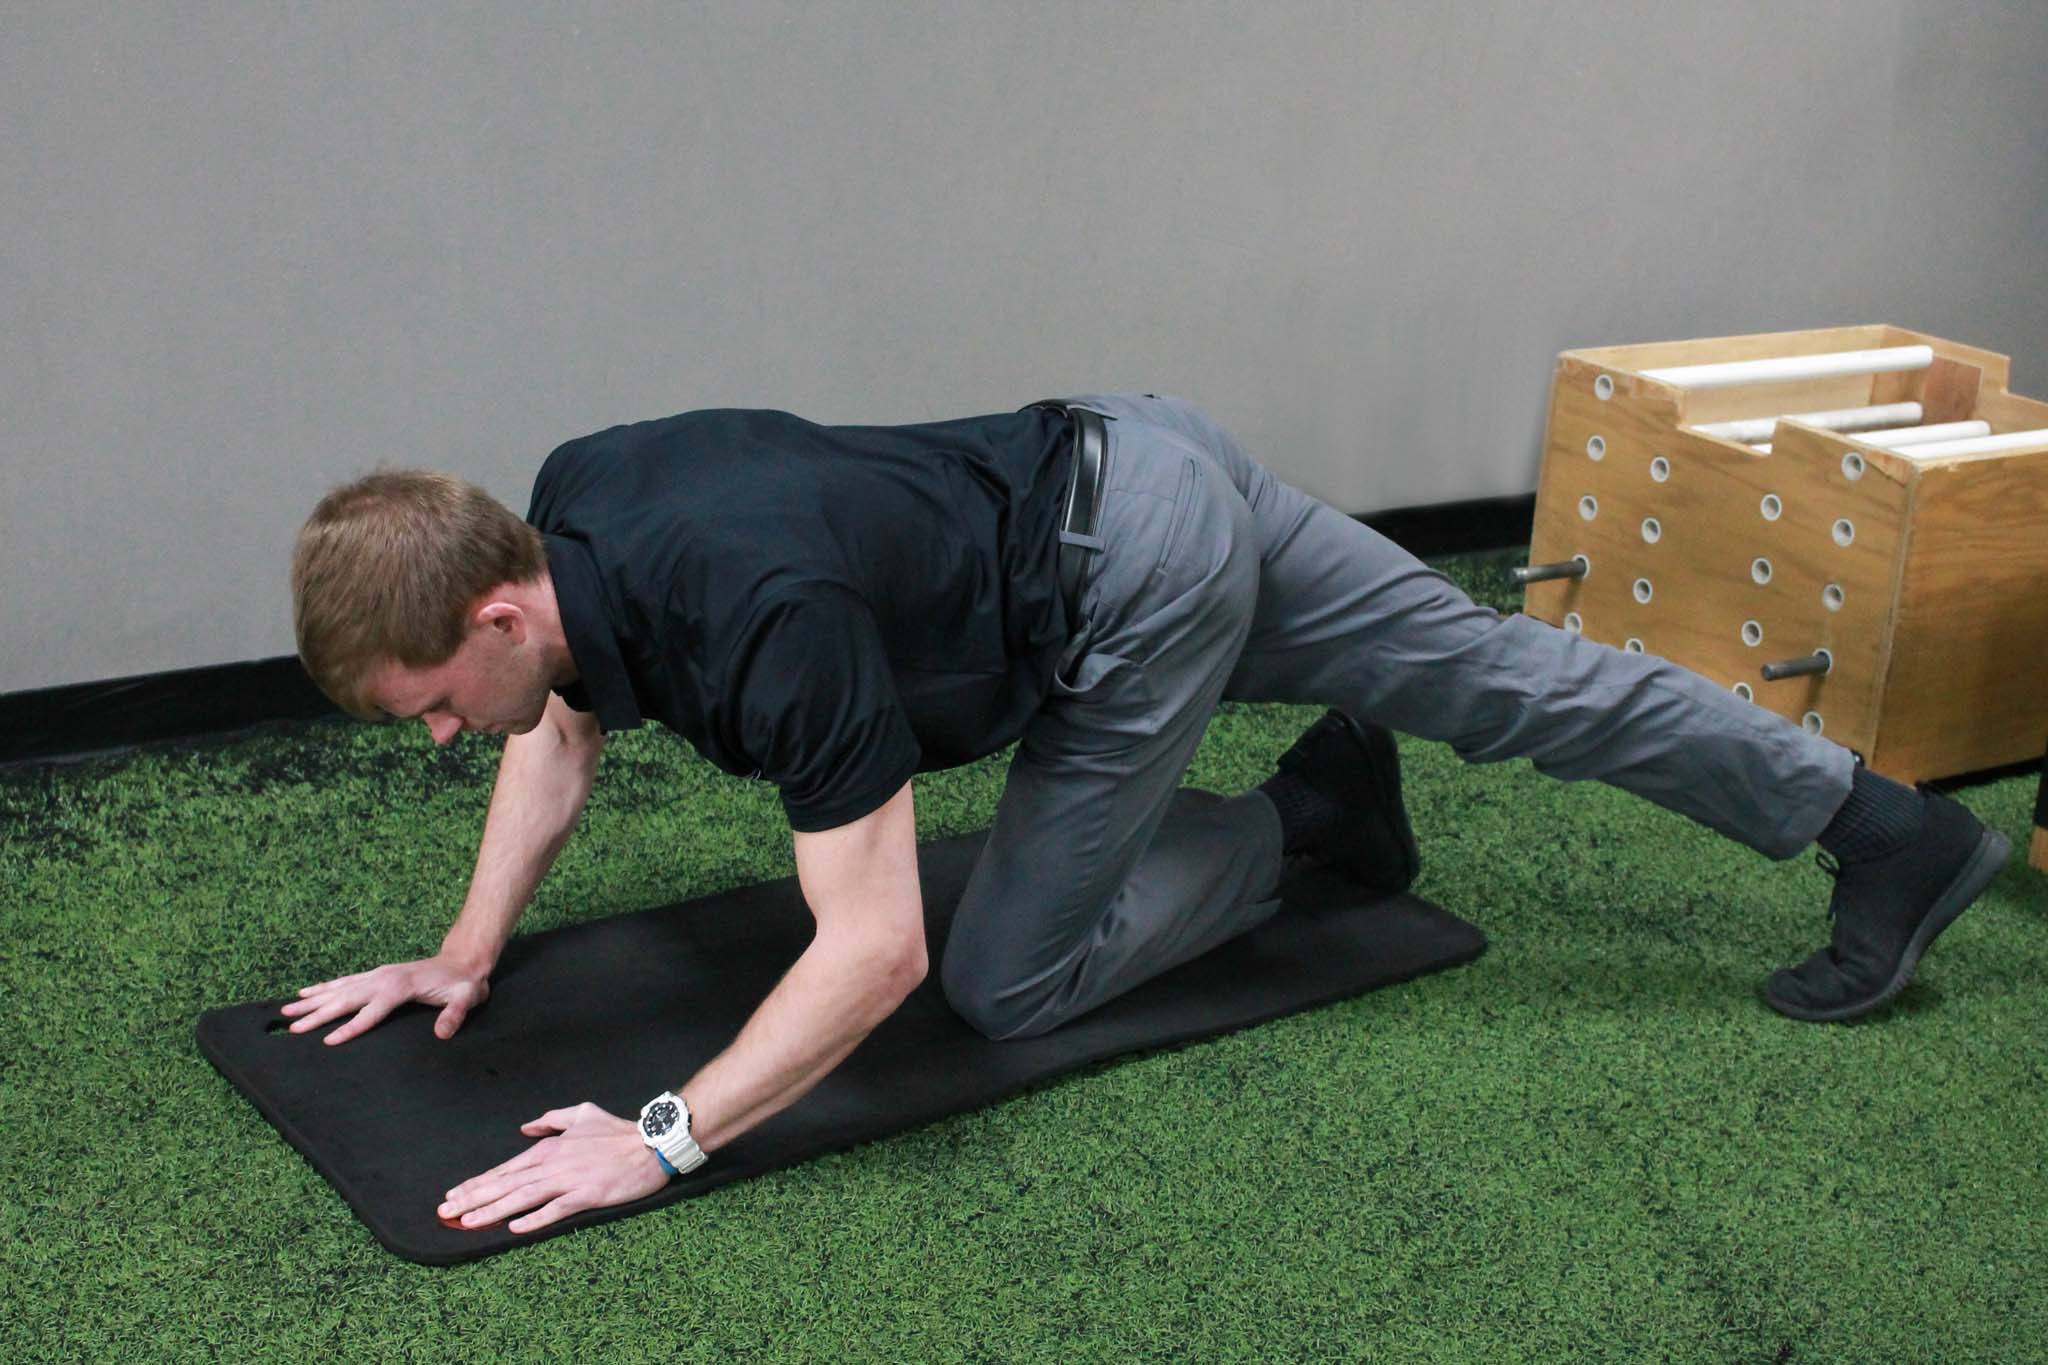 Posterior Capsule Stretch- Ending Position